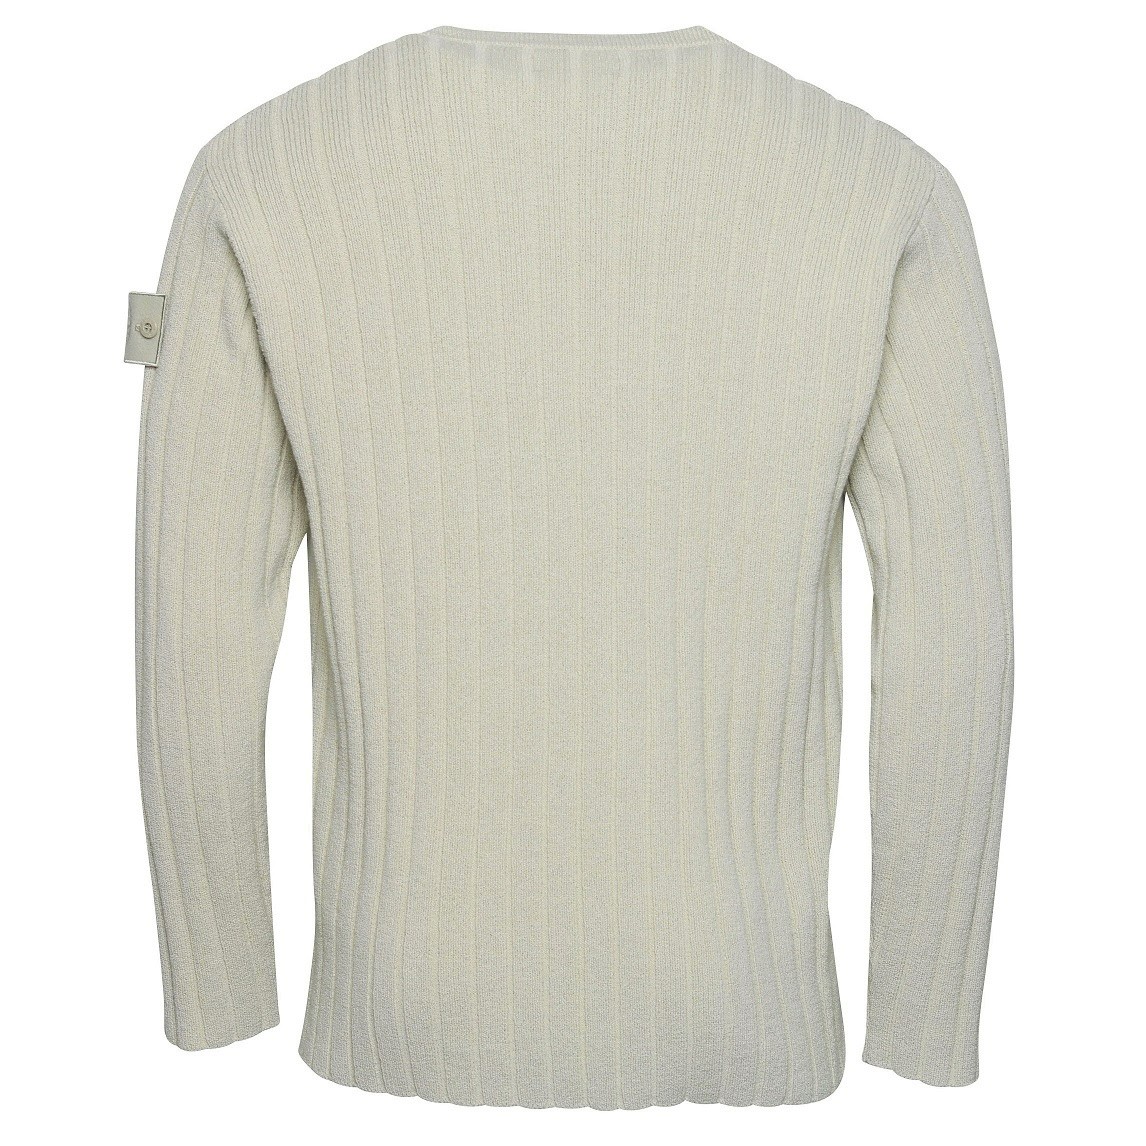 Stone Island Ghost Cotton Knit Pullover in Beige M